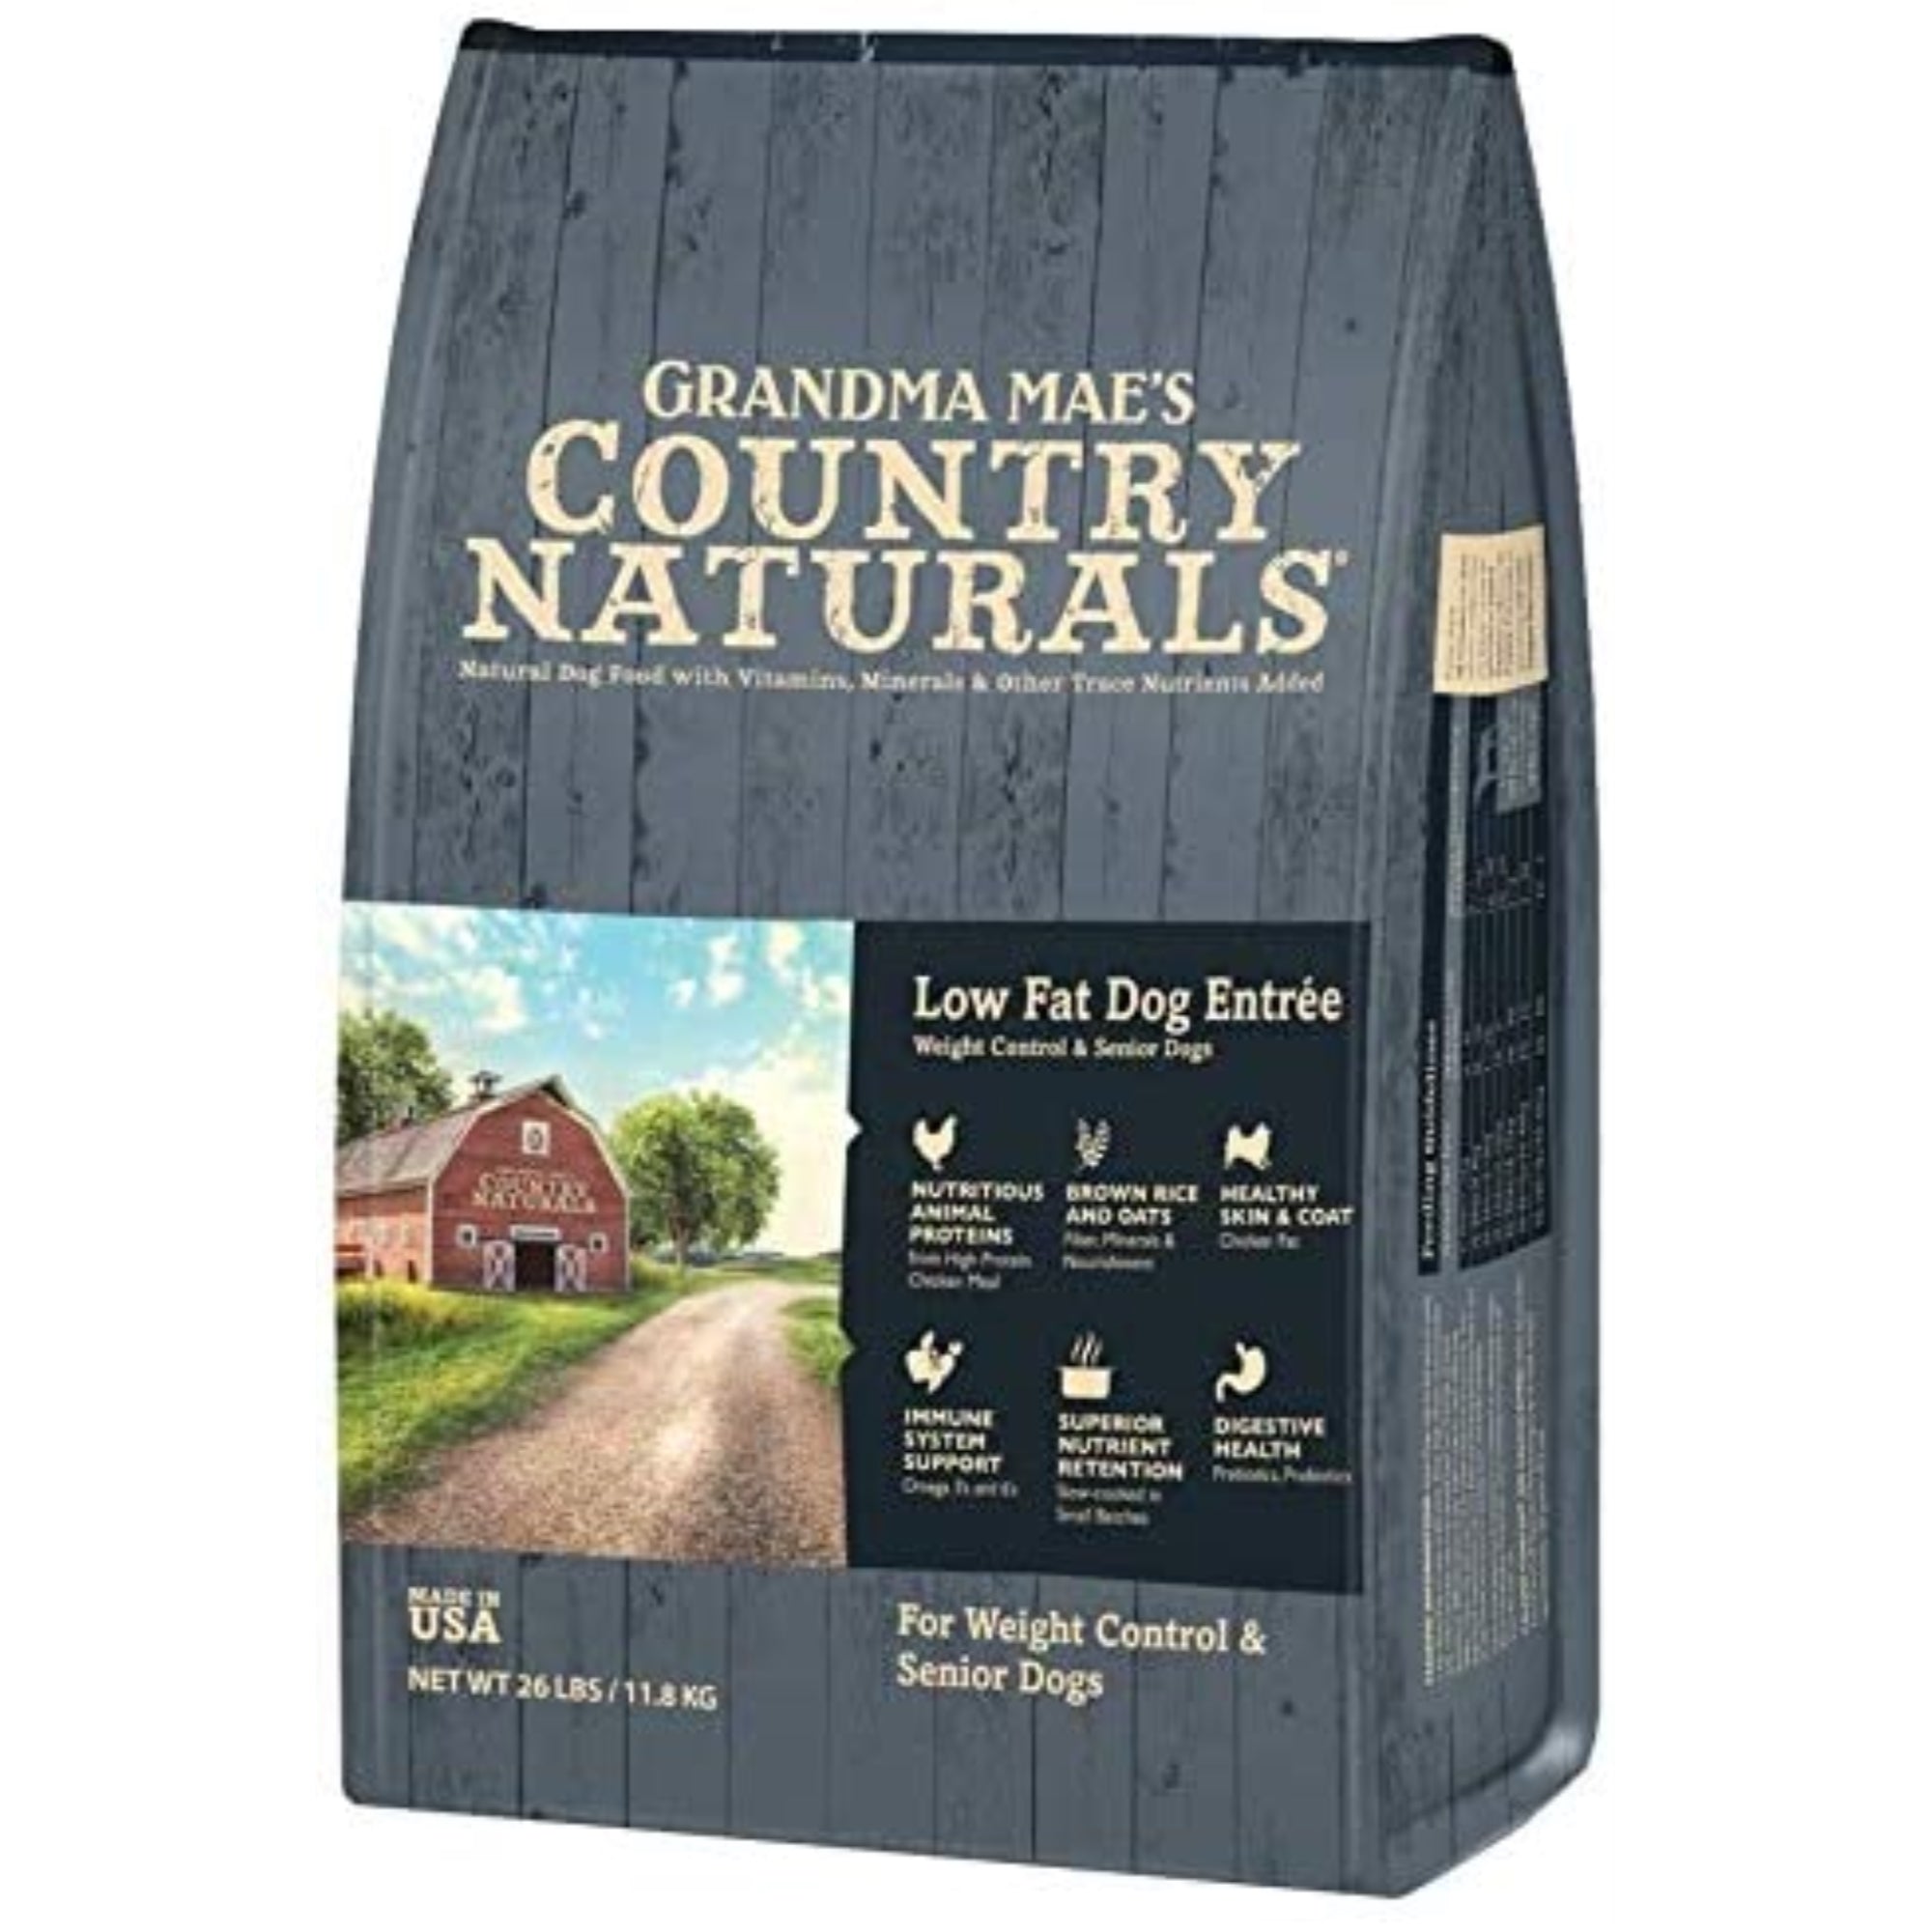 Grandma Mae’s Country Naturals Low-Fat Entrée with Meat & Brown Rice Dog Food, 14 LB